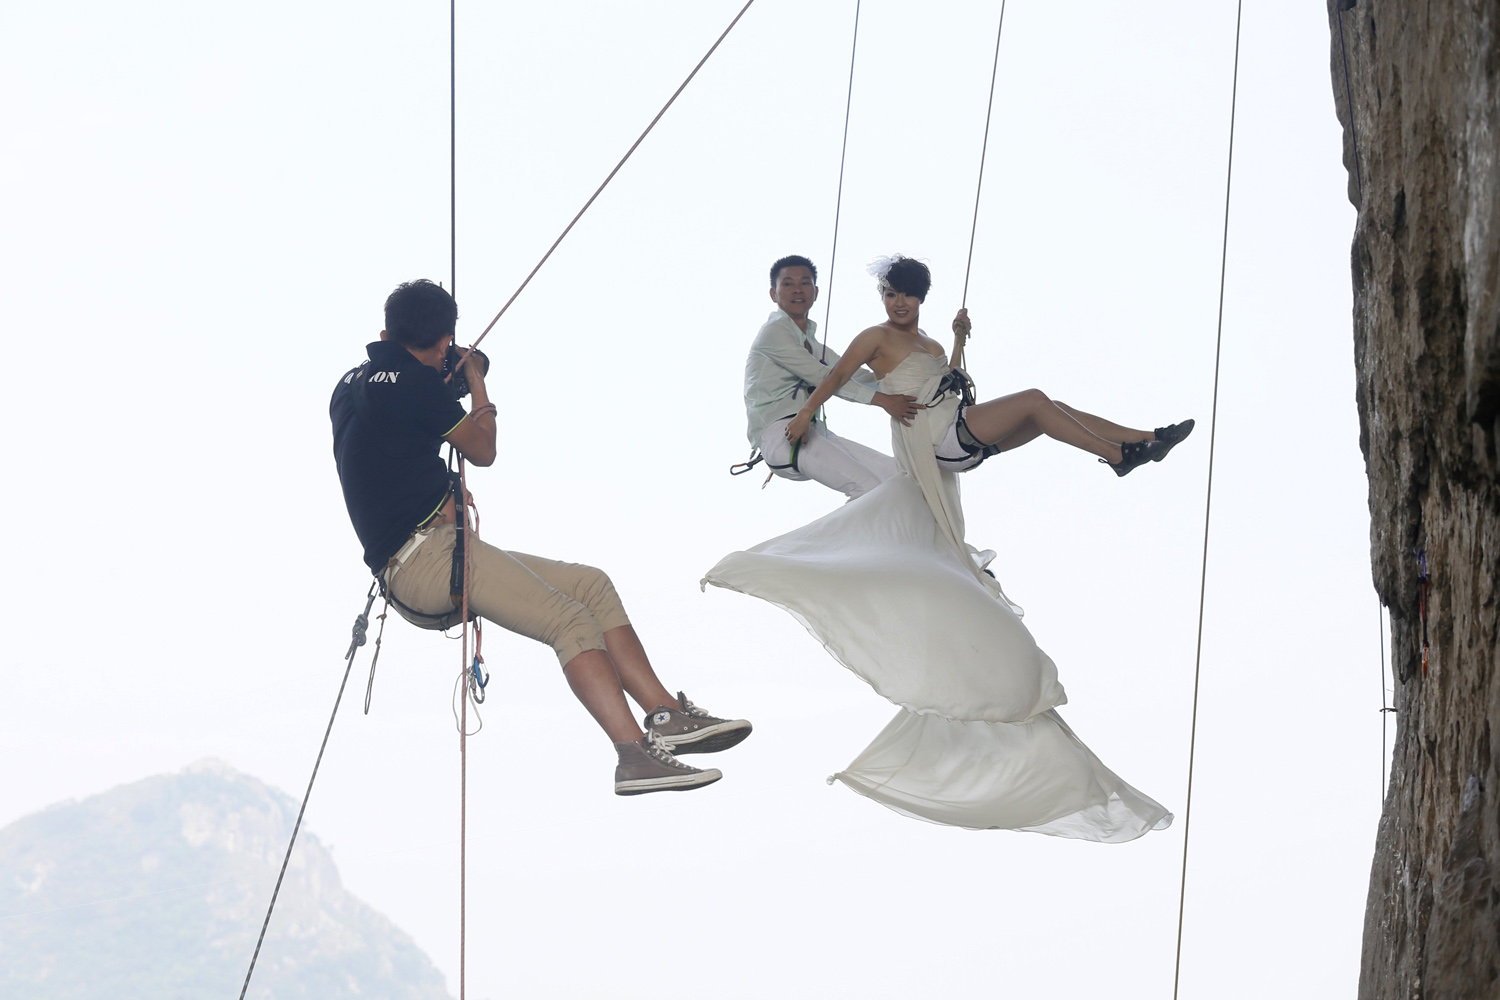 A photographer takes pictures of Fang in a wedding gown next to her husband as they hang from a cliff during a rock climbing exercise in Liuzhou